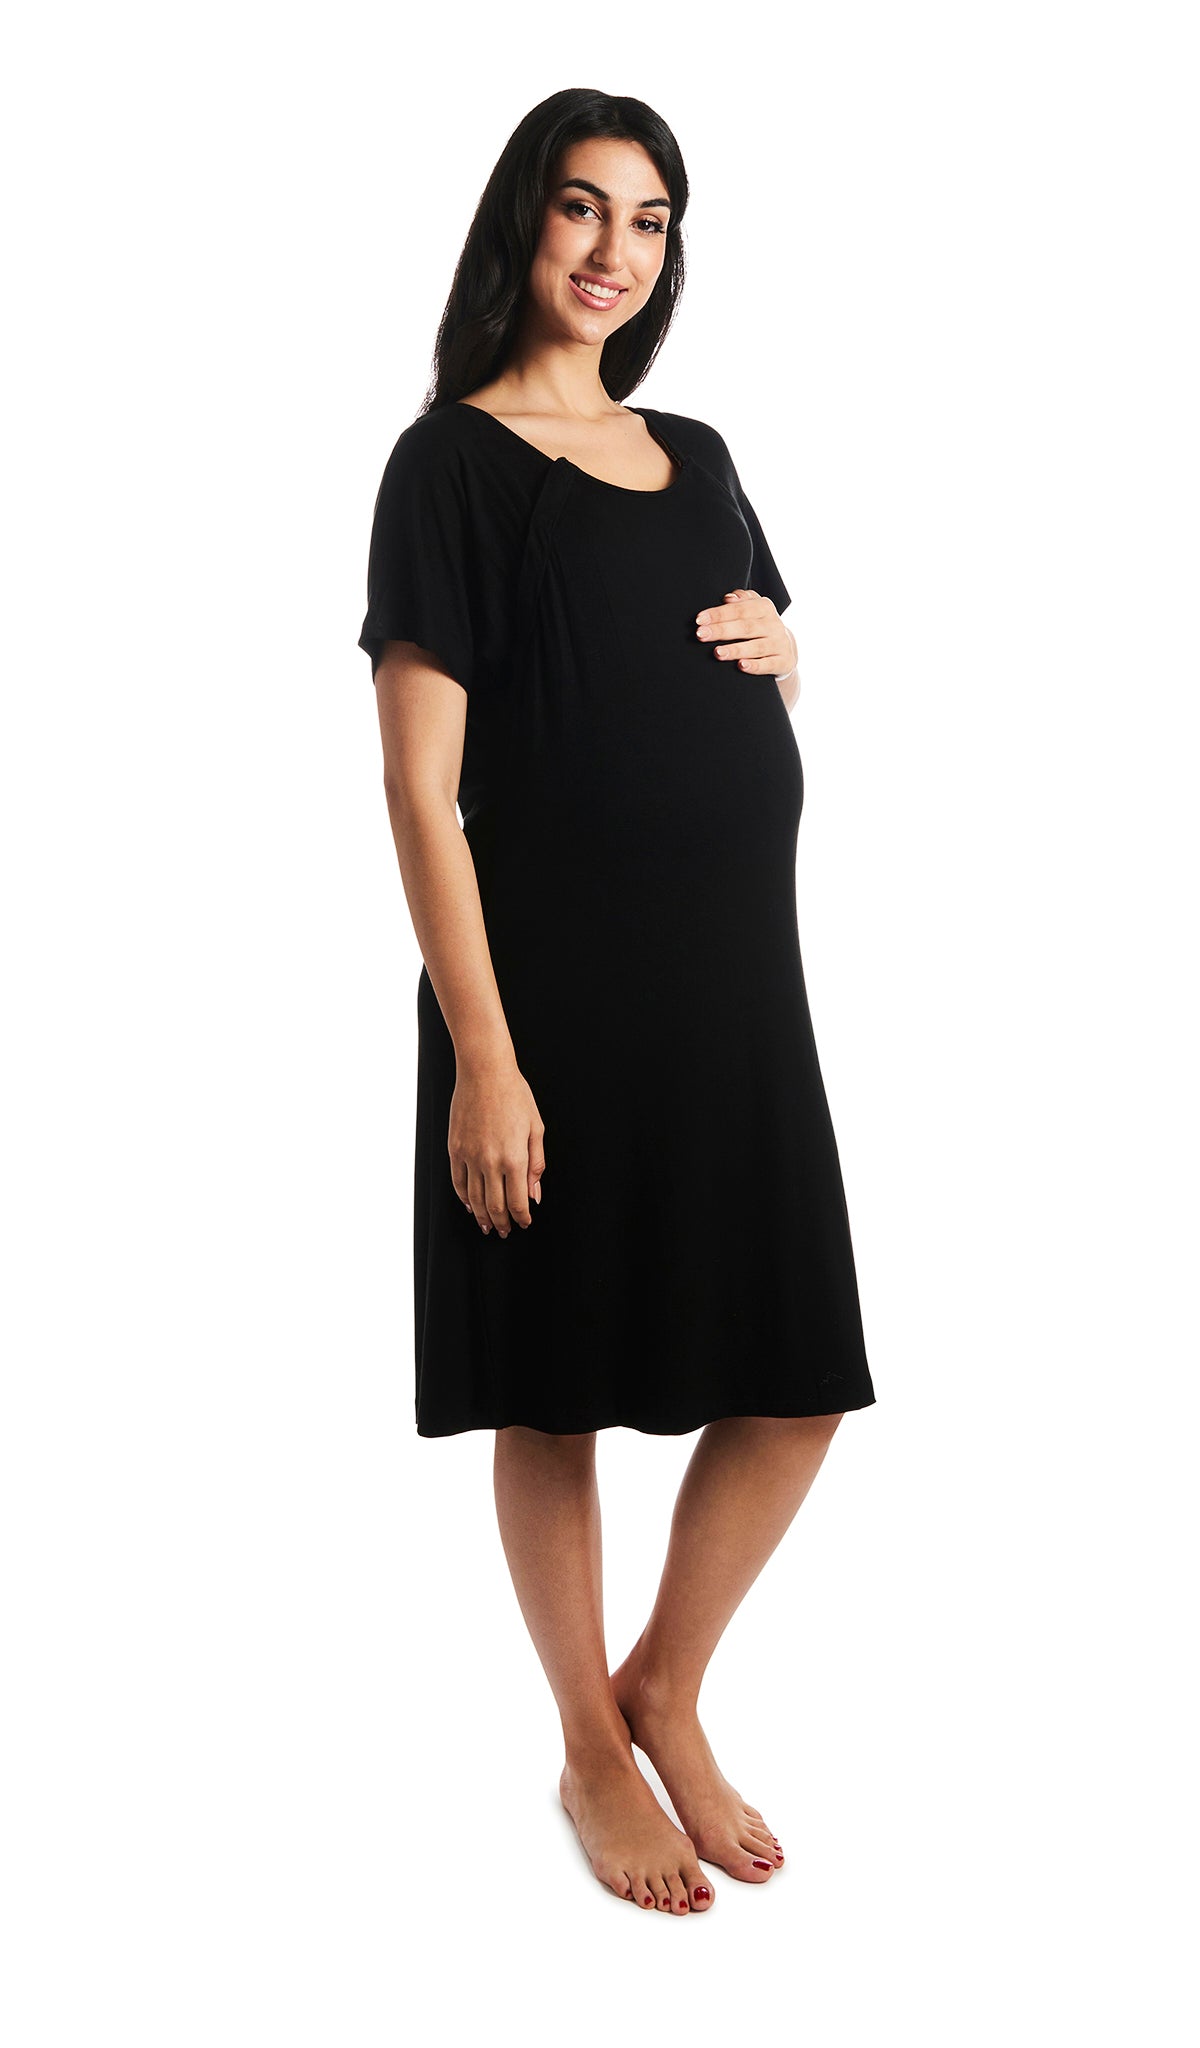 Black Rosa hospital gown. Pregnant woman with one hand on belly, wearing hospital gown with scoop-neckline featuring dual snap openings. 